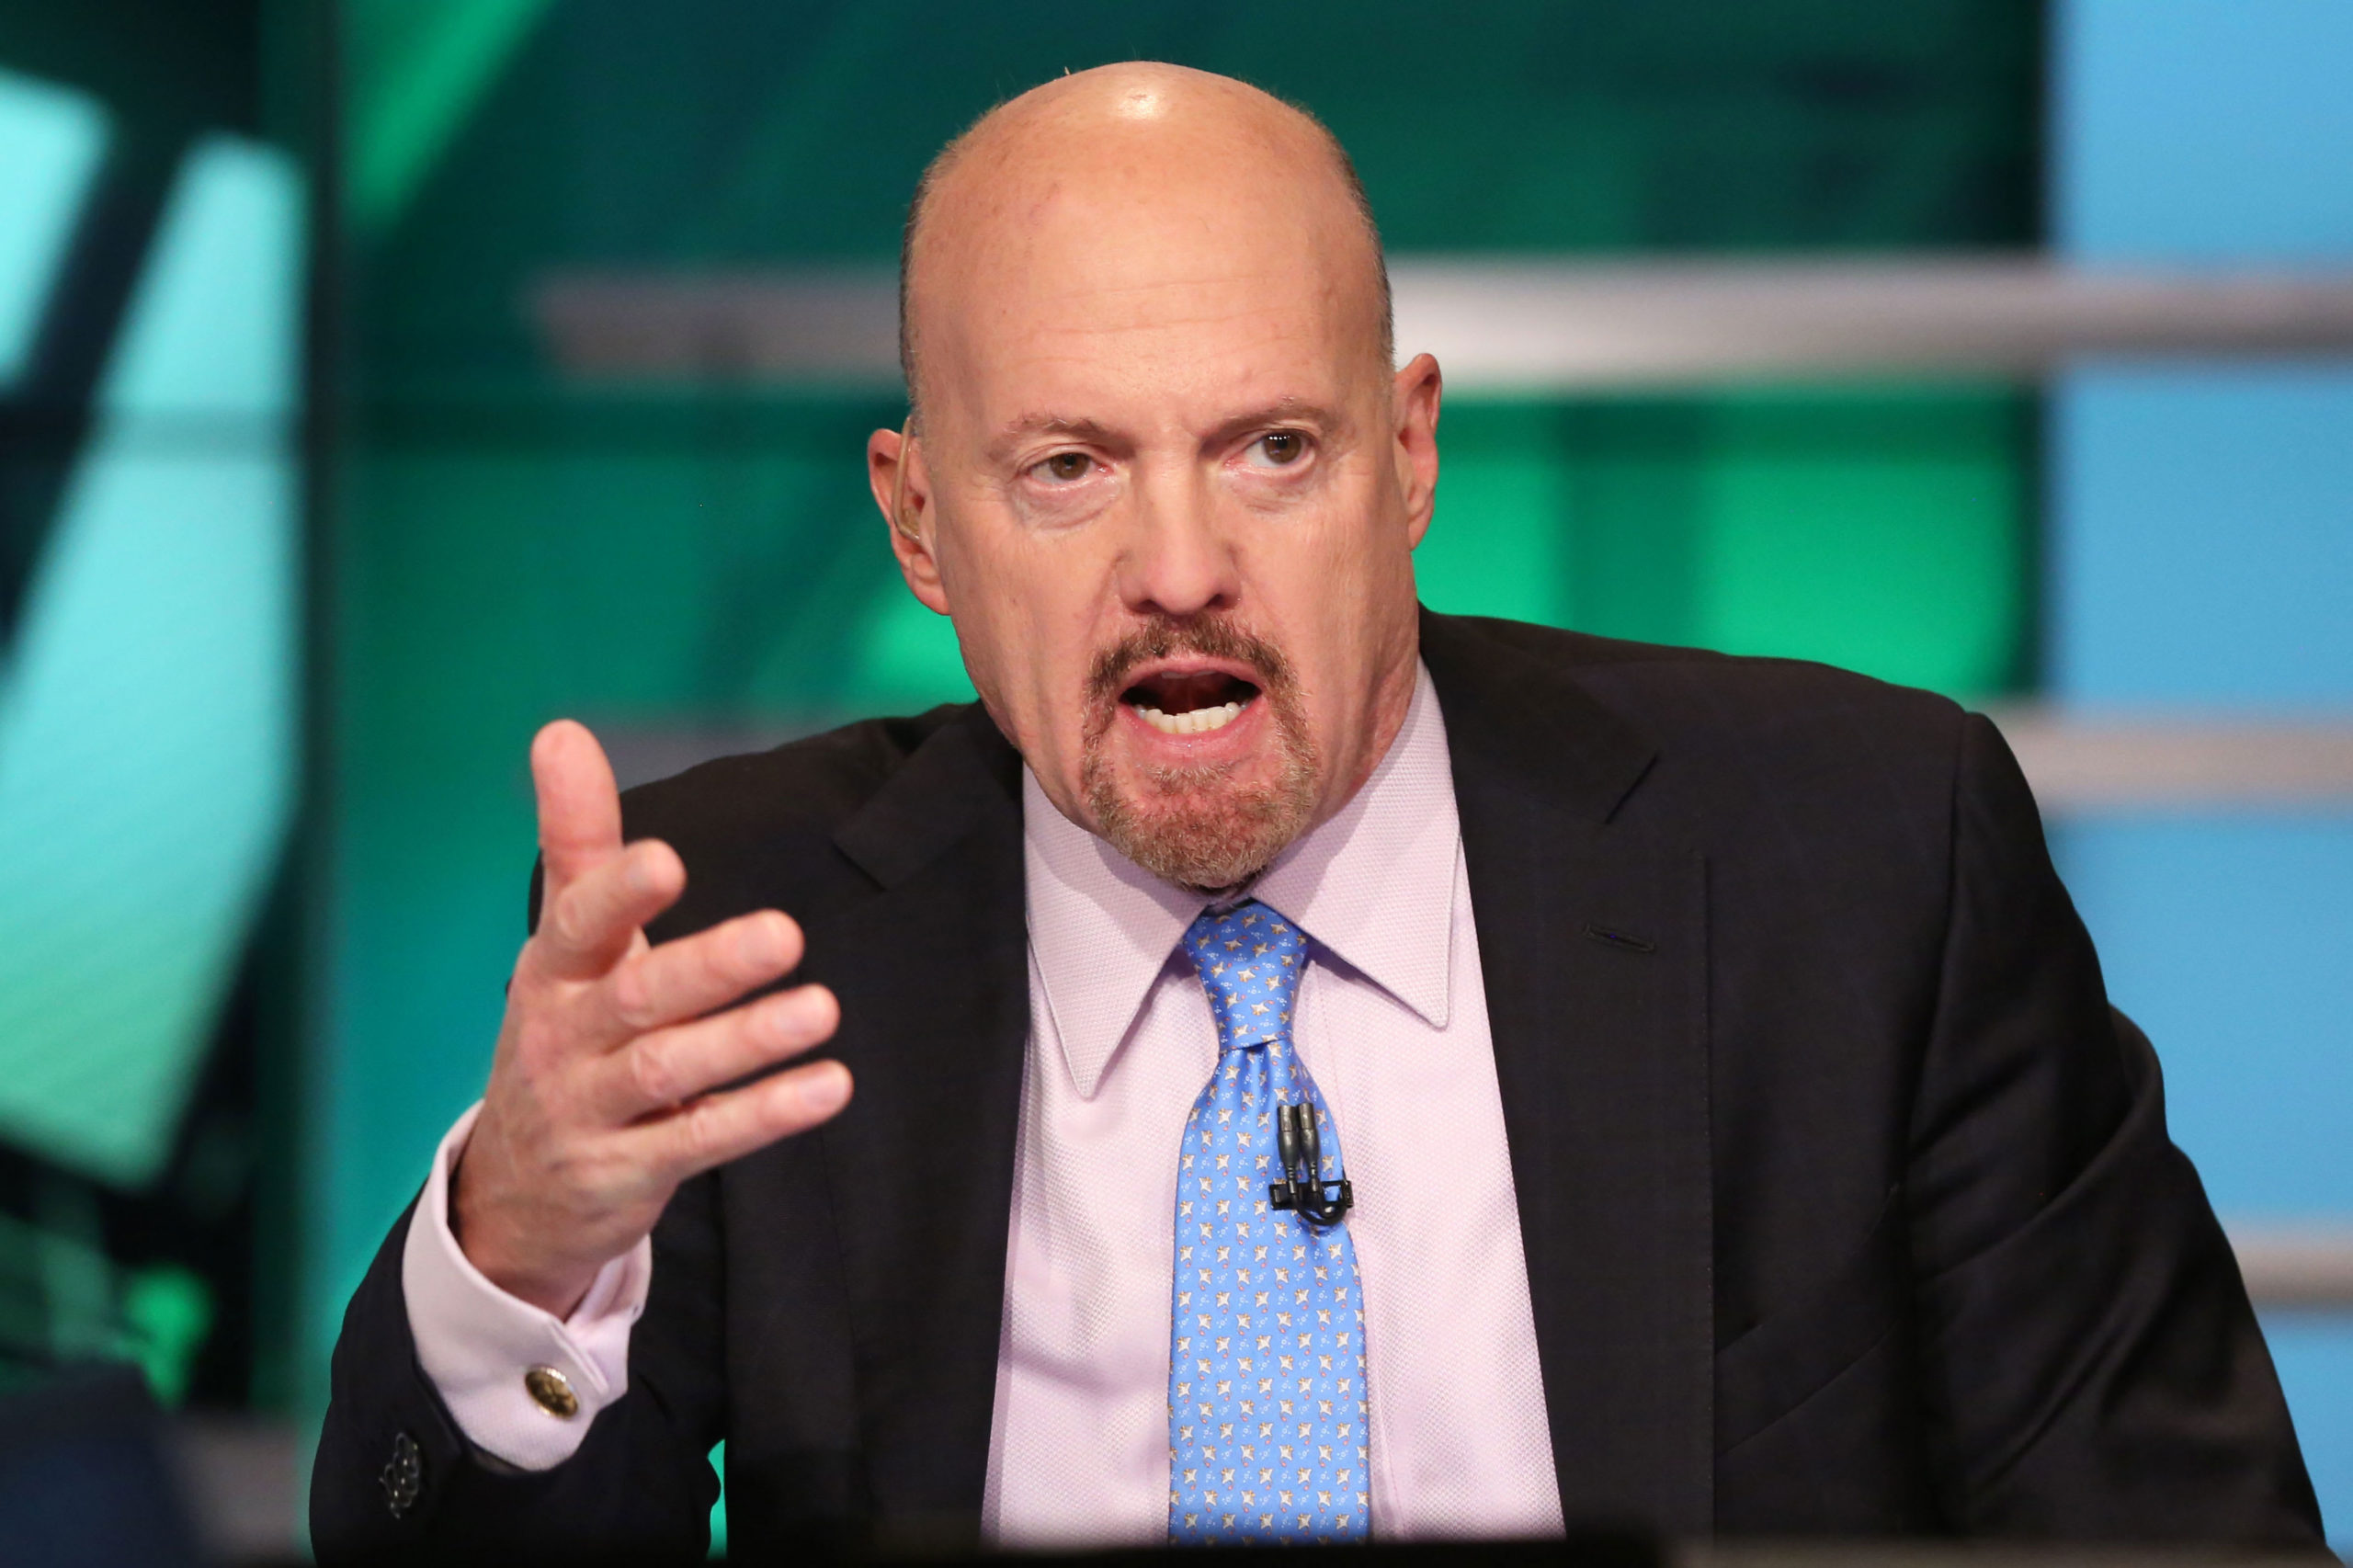 Cramer appears like a clown for defending Boeing early in 737 Max flap